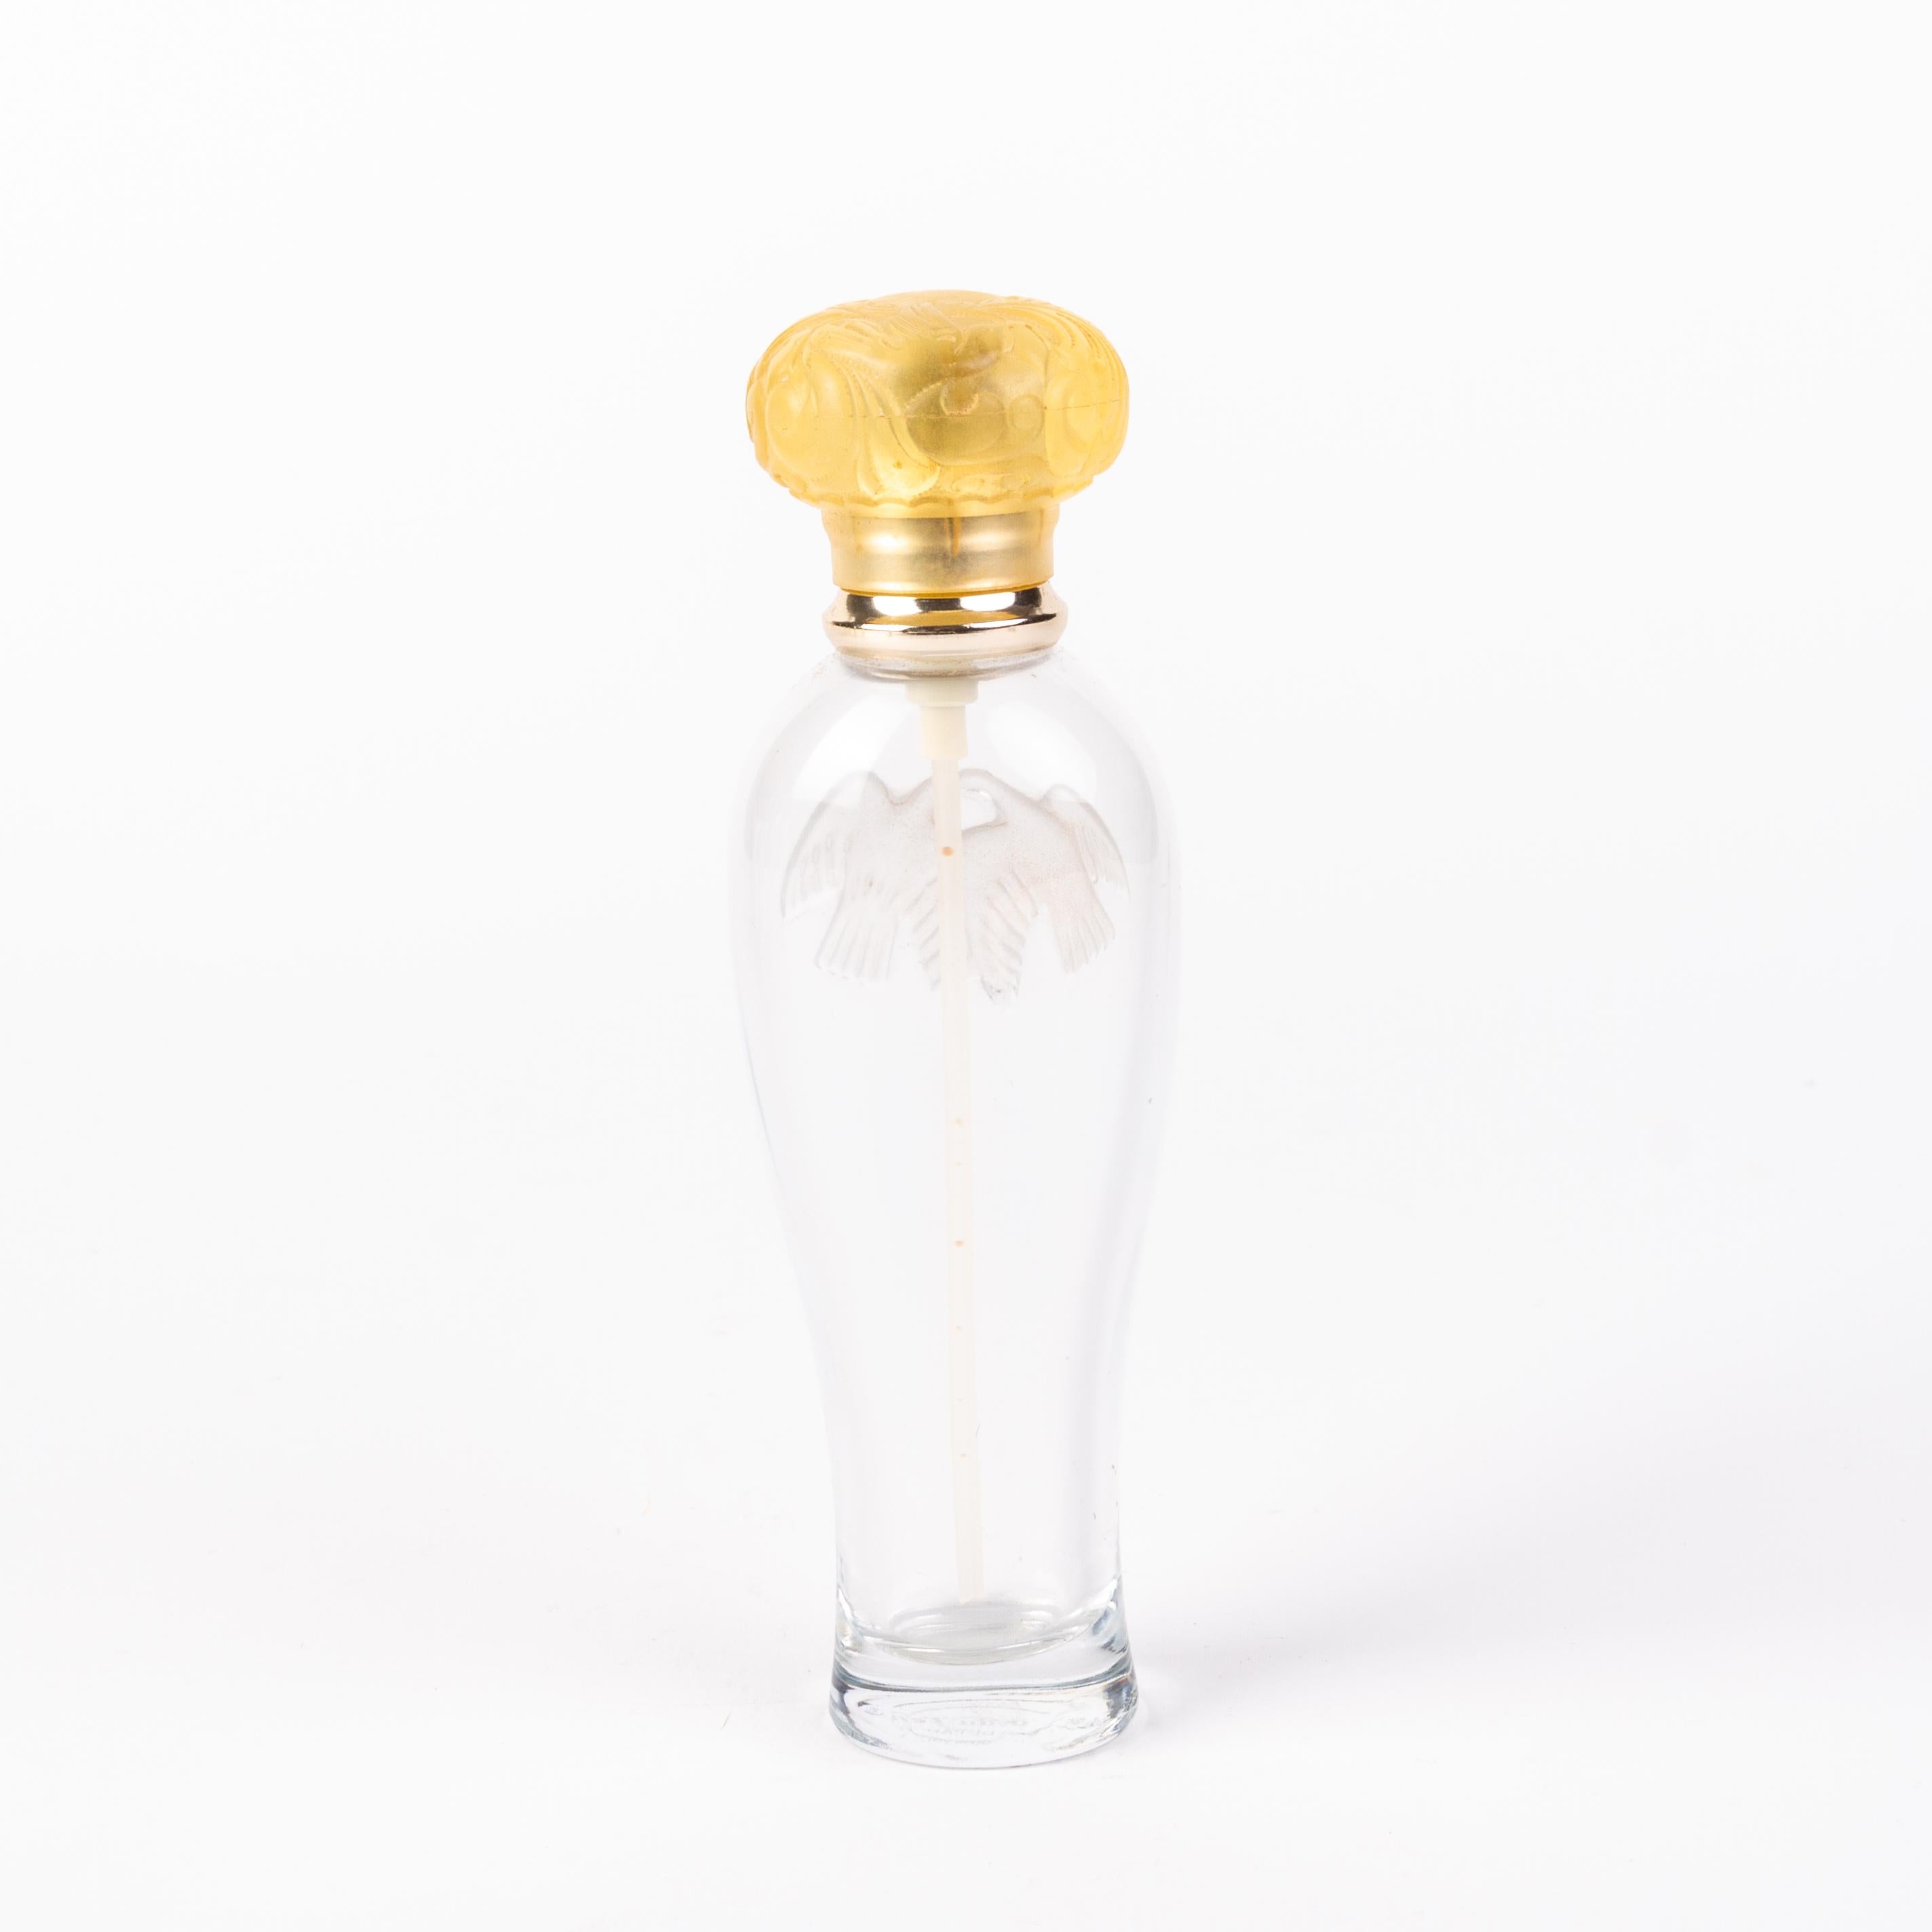 In good condition
From a private collection
Free international shipping
Lalique French Bas Relief Scent Perfume Bottle 